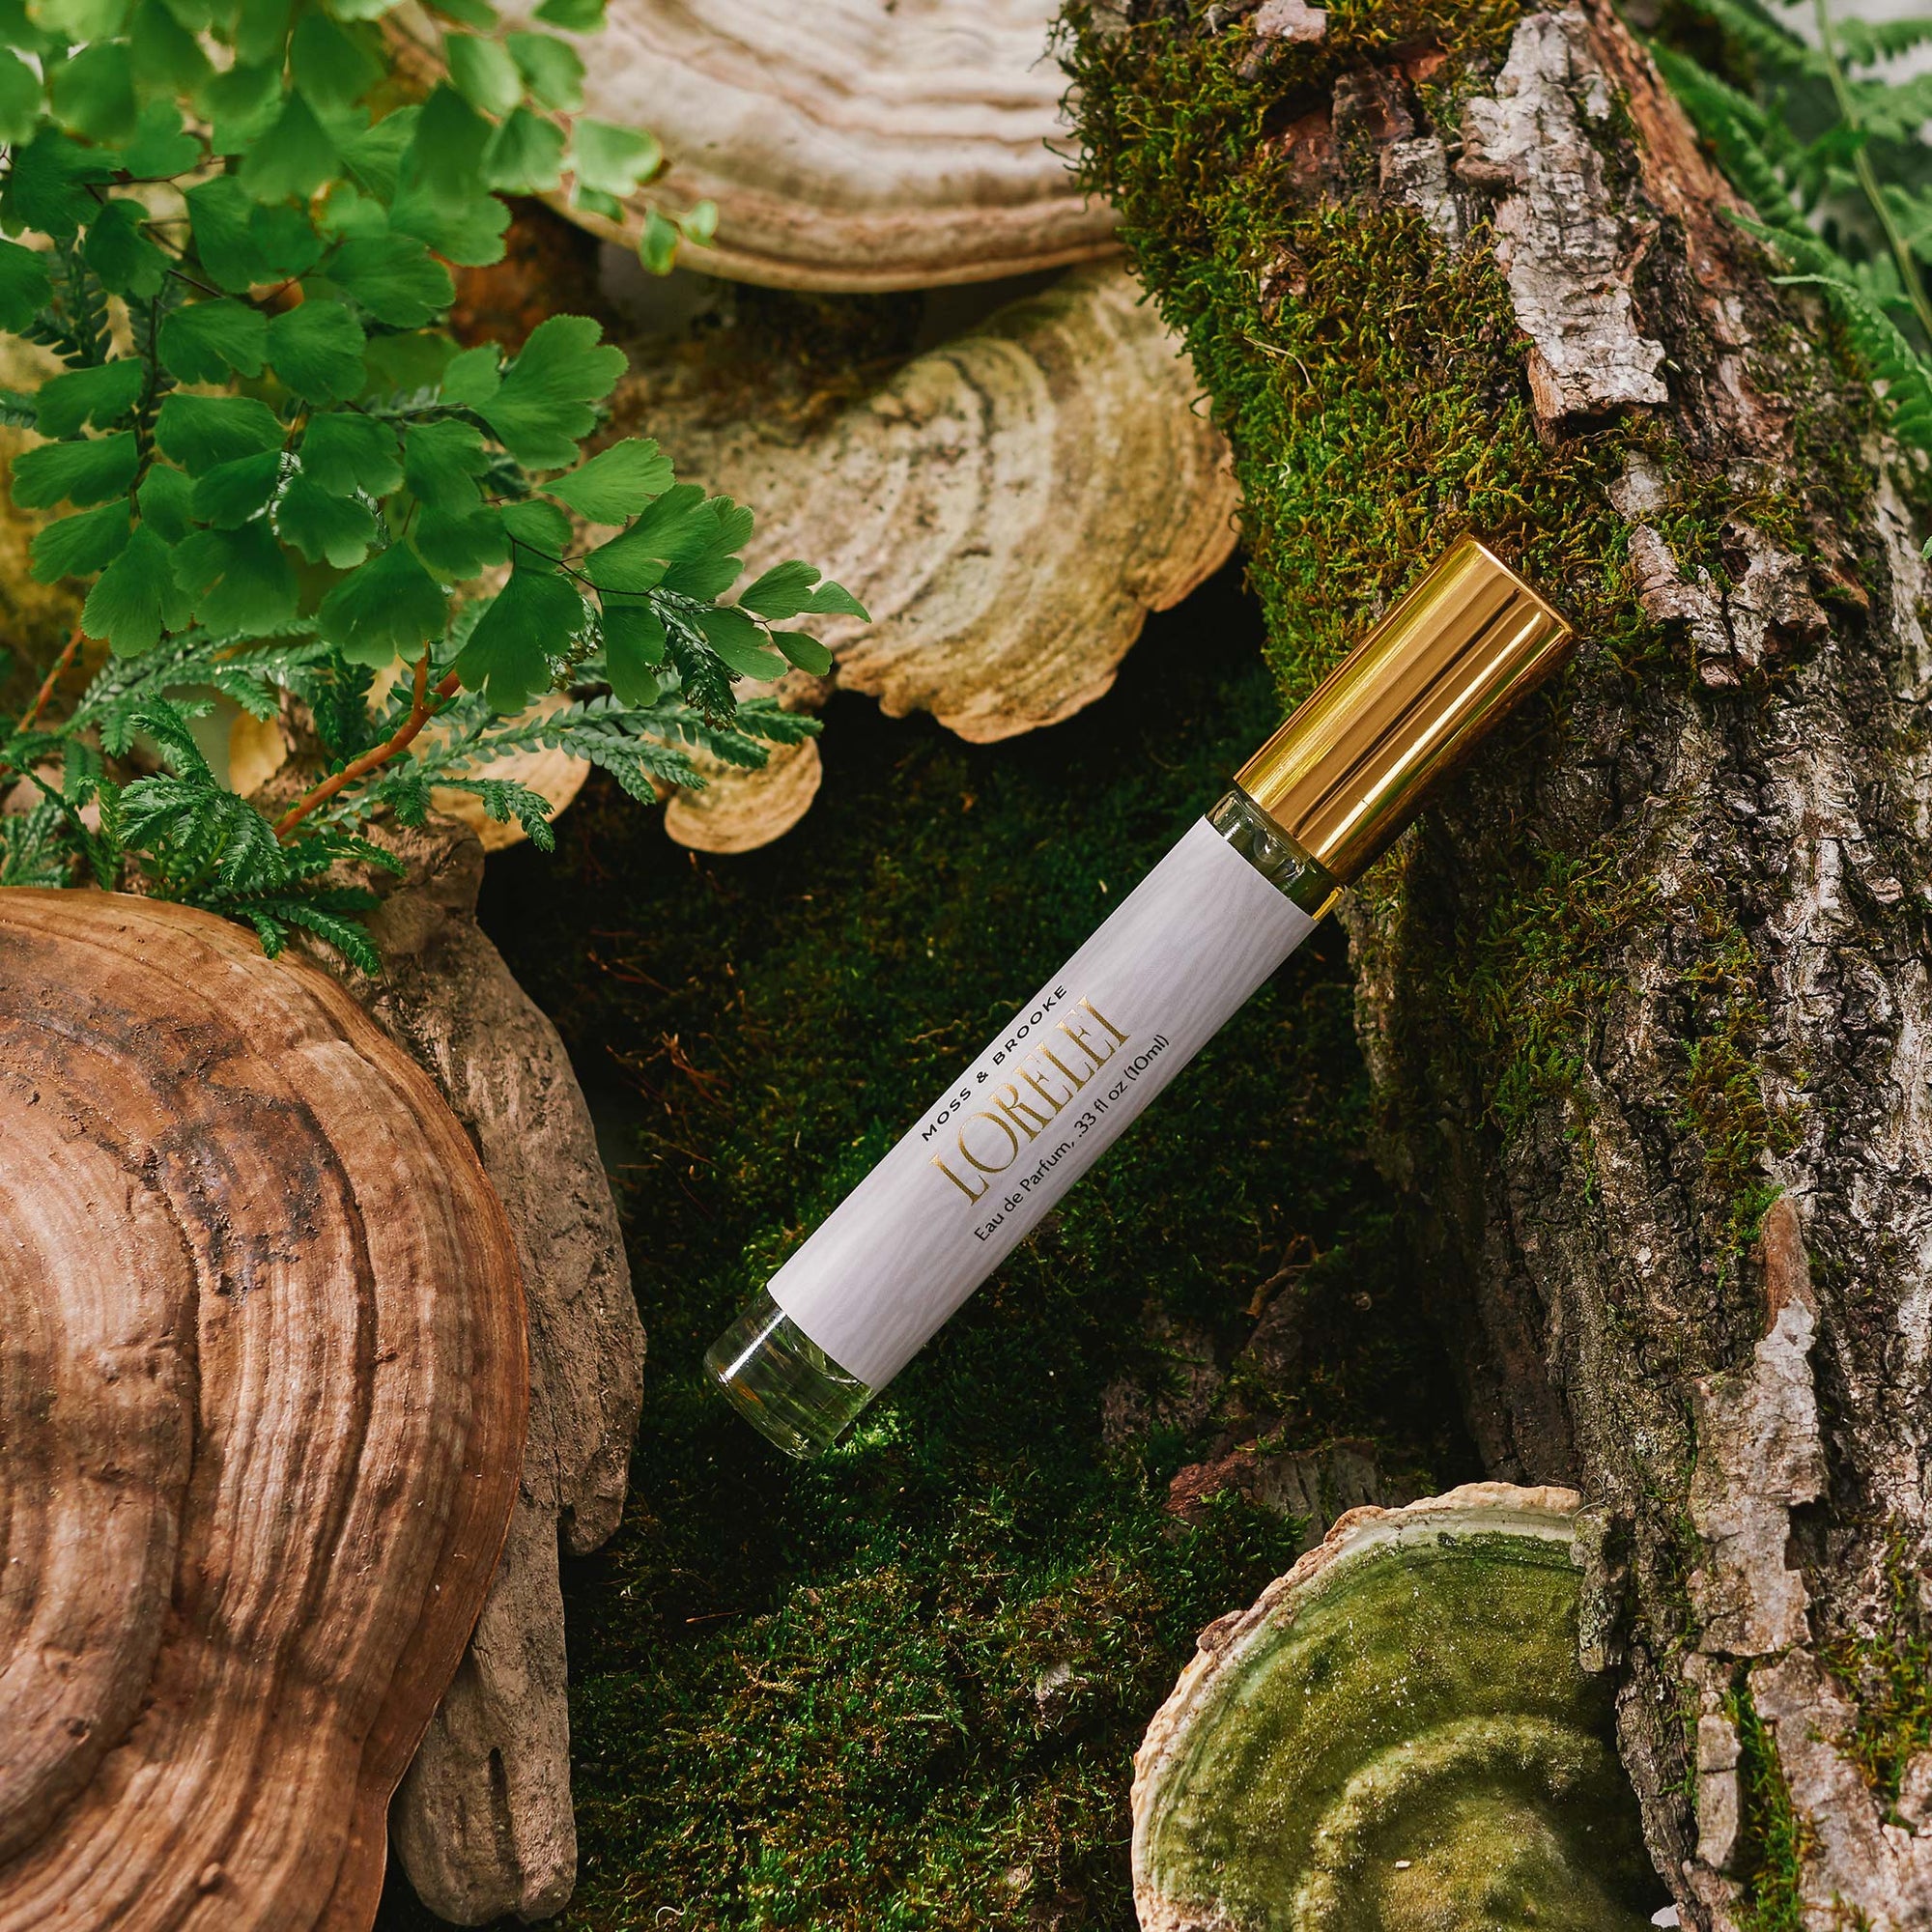 Bottle of Moss & Brooke Lorelei Perfume on a background of moss, wood and mushrooms. Packaged in a clear bottle with gold cap and luxurious gold foiled labeling, with scents of grapefruit, jasmine, coconut, sandalwood and vanilla.